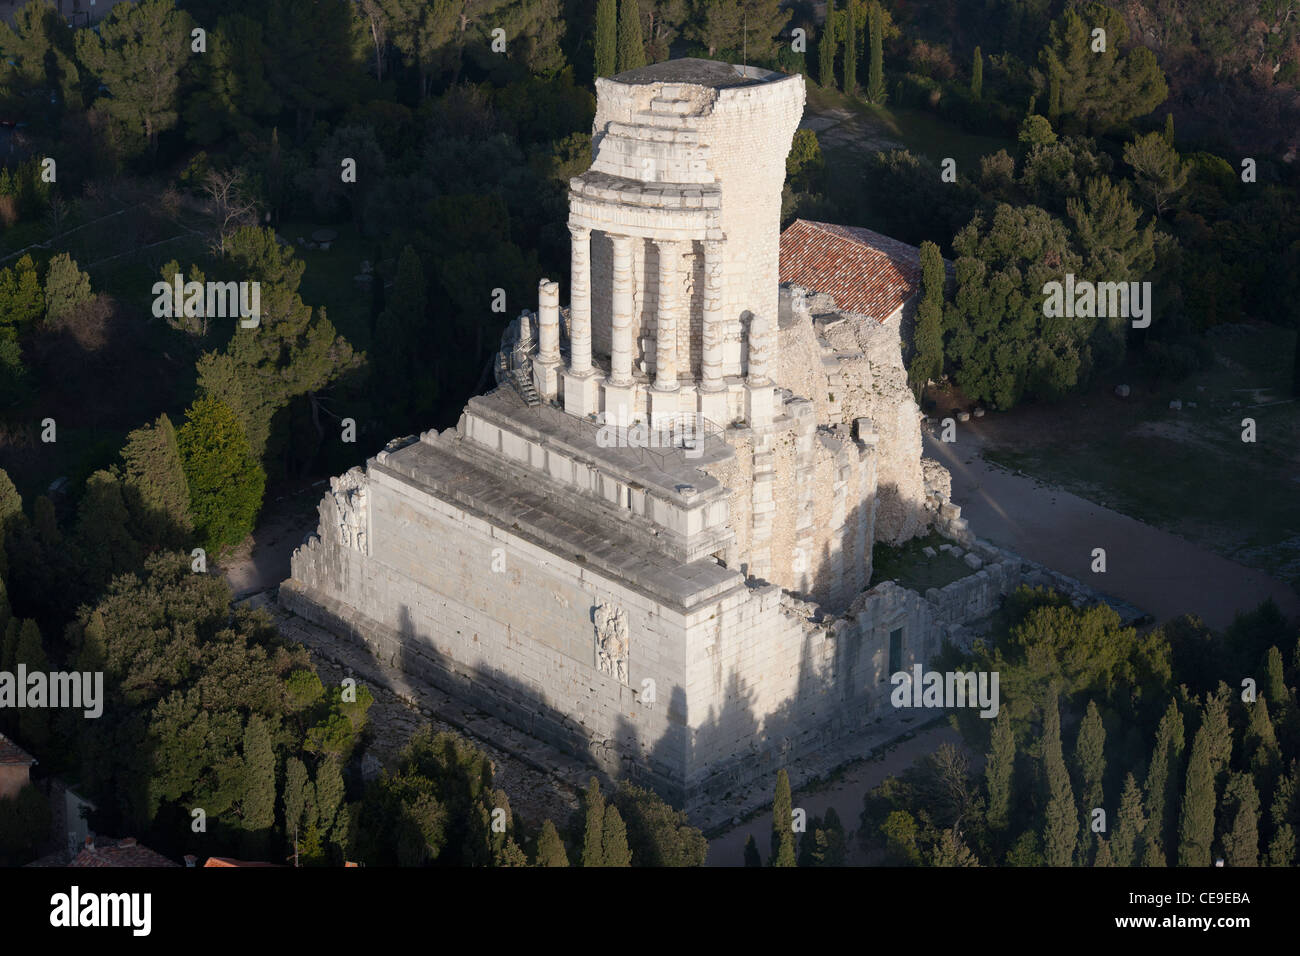 AERIAL VIEW. Trophy of Augustus, roman monument built circa 6 BC. La Turbie, French Riviera, France. Stock Photo